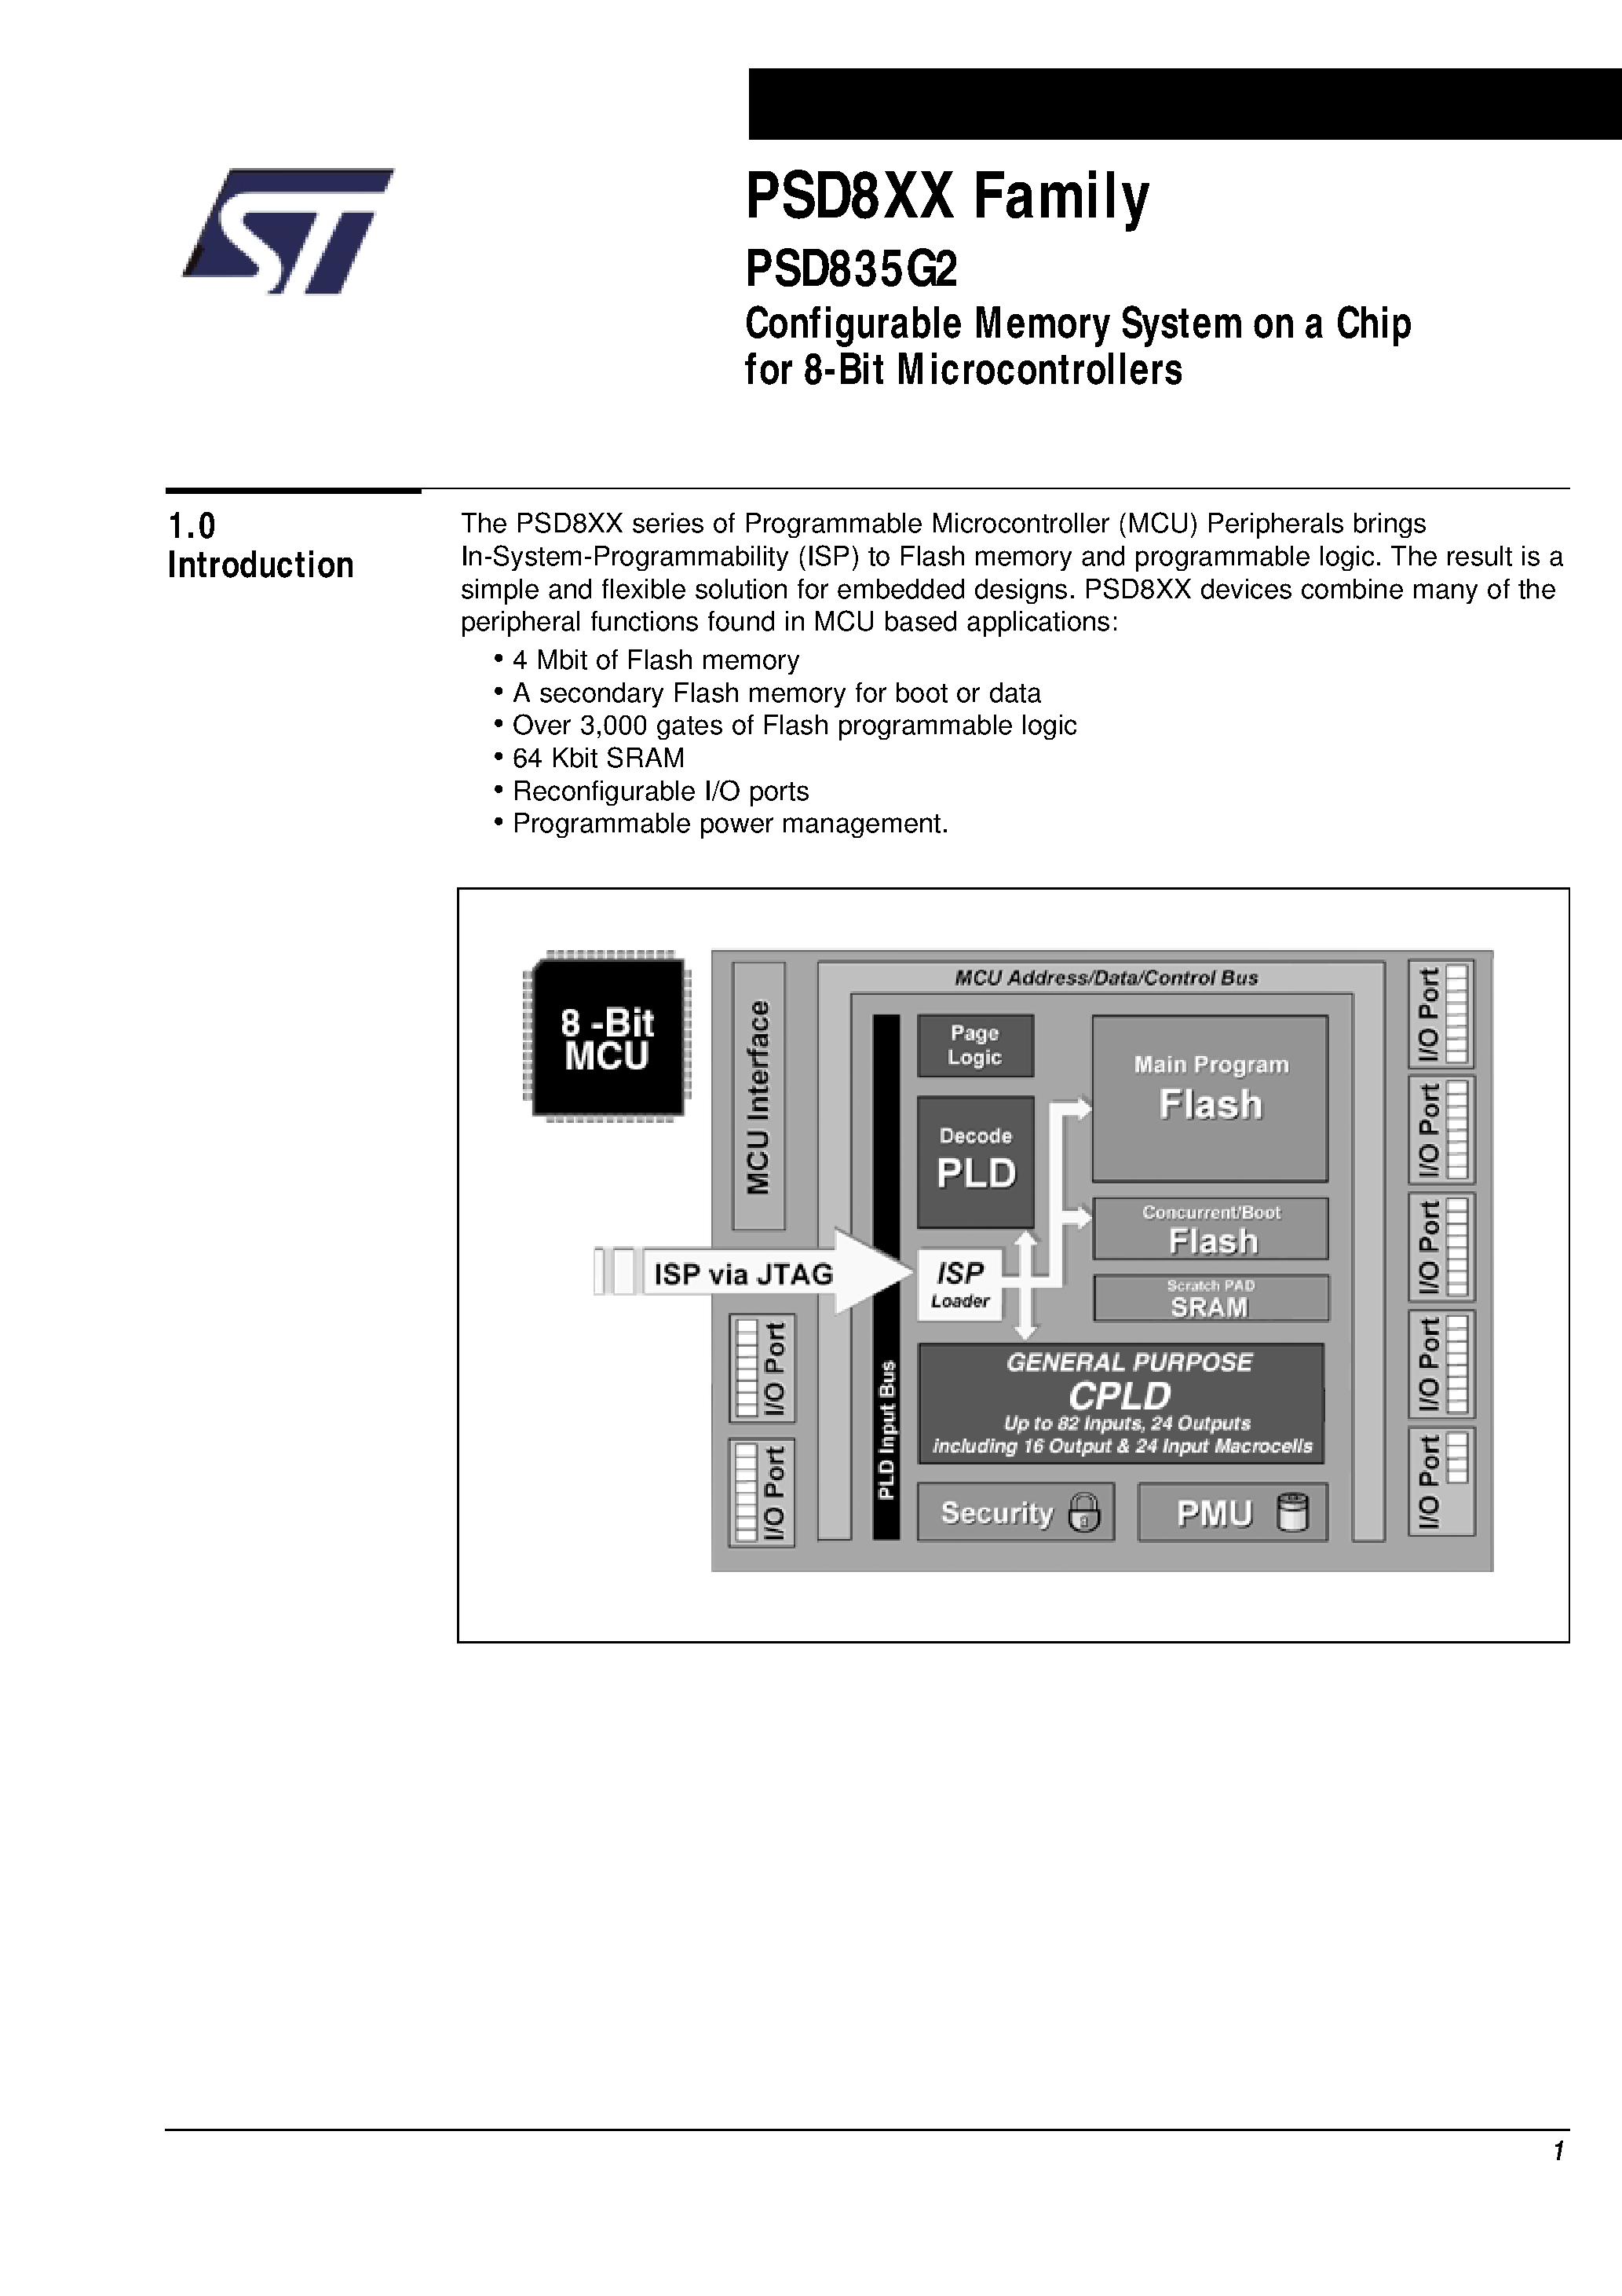 Datasheet PSD835F1-A-90B81I - Configurable Memory System on a Chip for 8-Bit Microcontrollers page 2